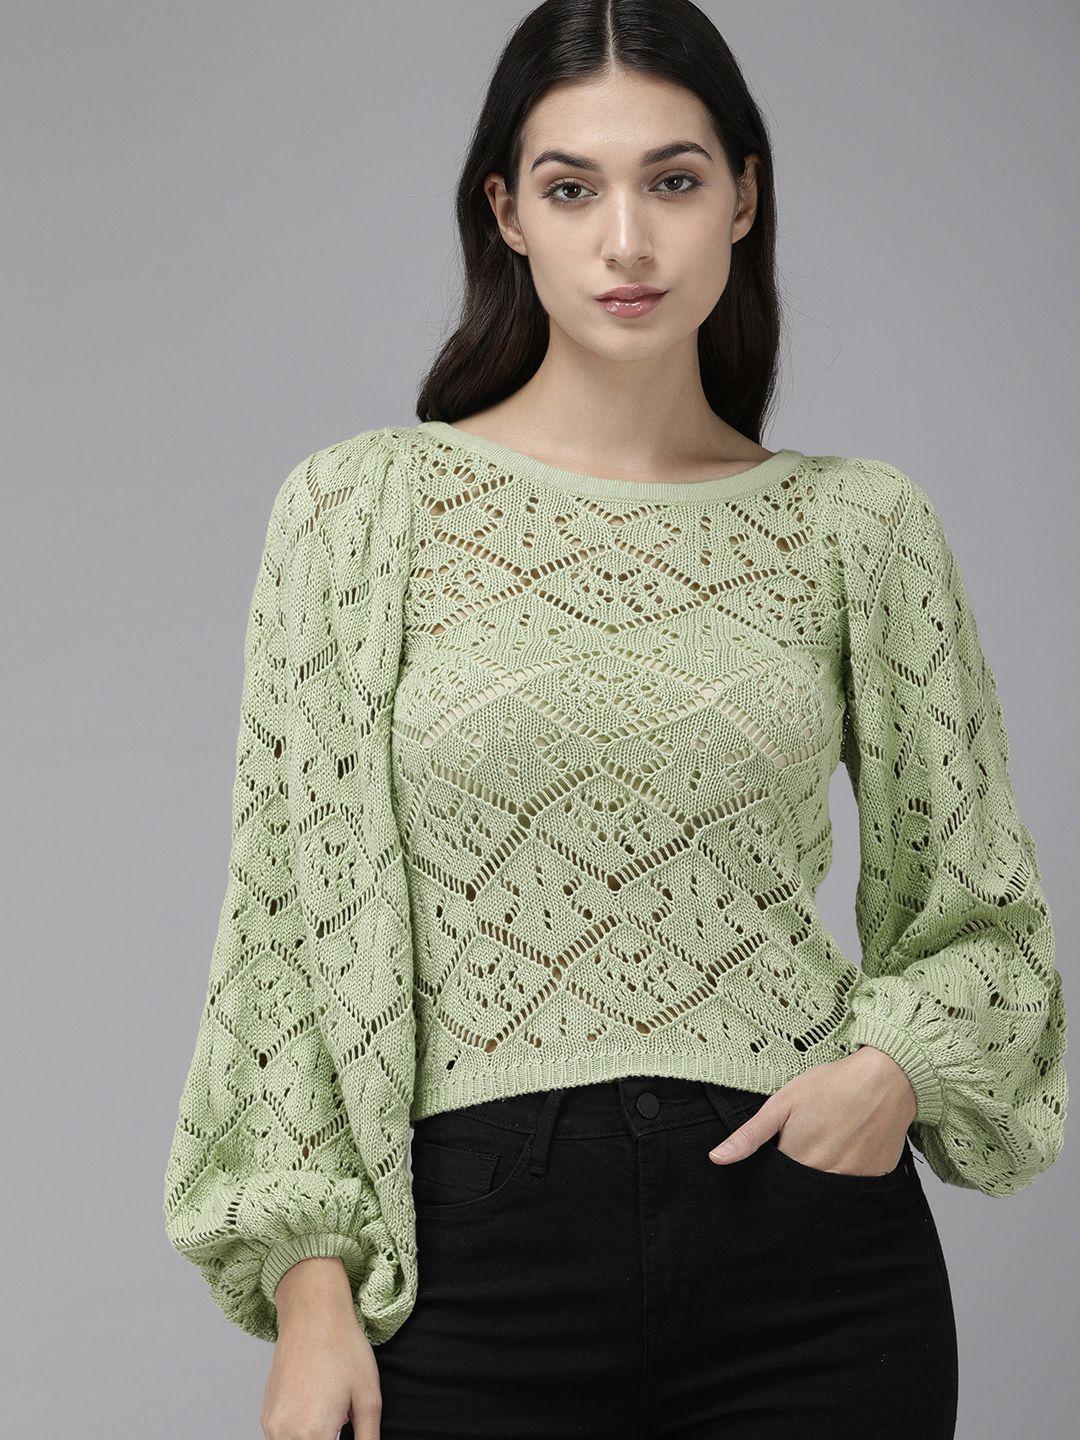 the-roadster-life-co.-women-light-green-geometric-pattern-pure-cotton-open-knitted-top